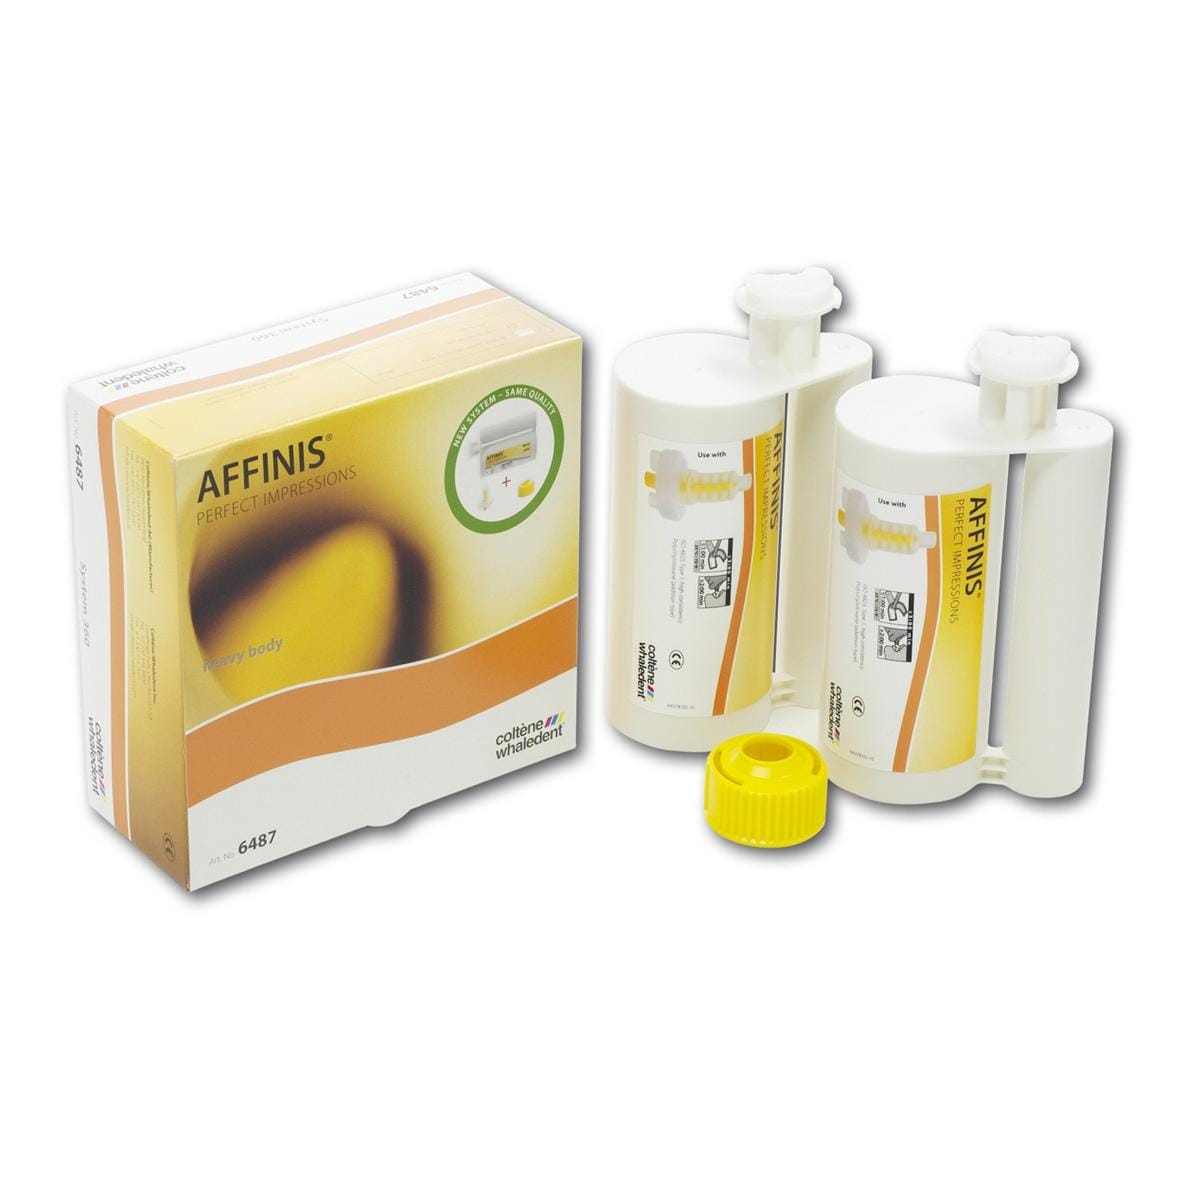 Affinis System 360 - Standard Pack - Heavy Body, 2x 362 ml